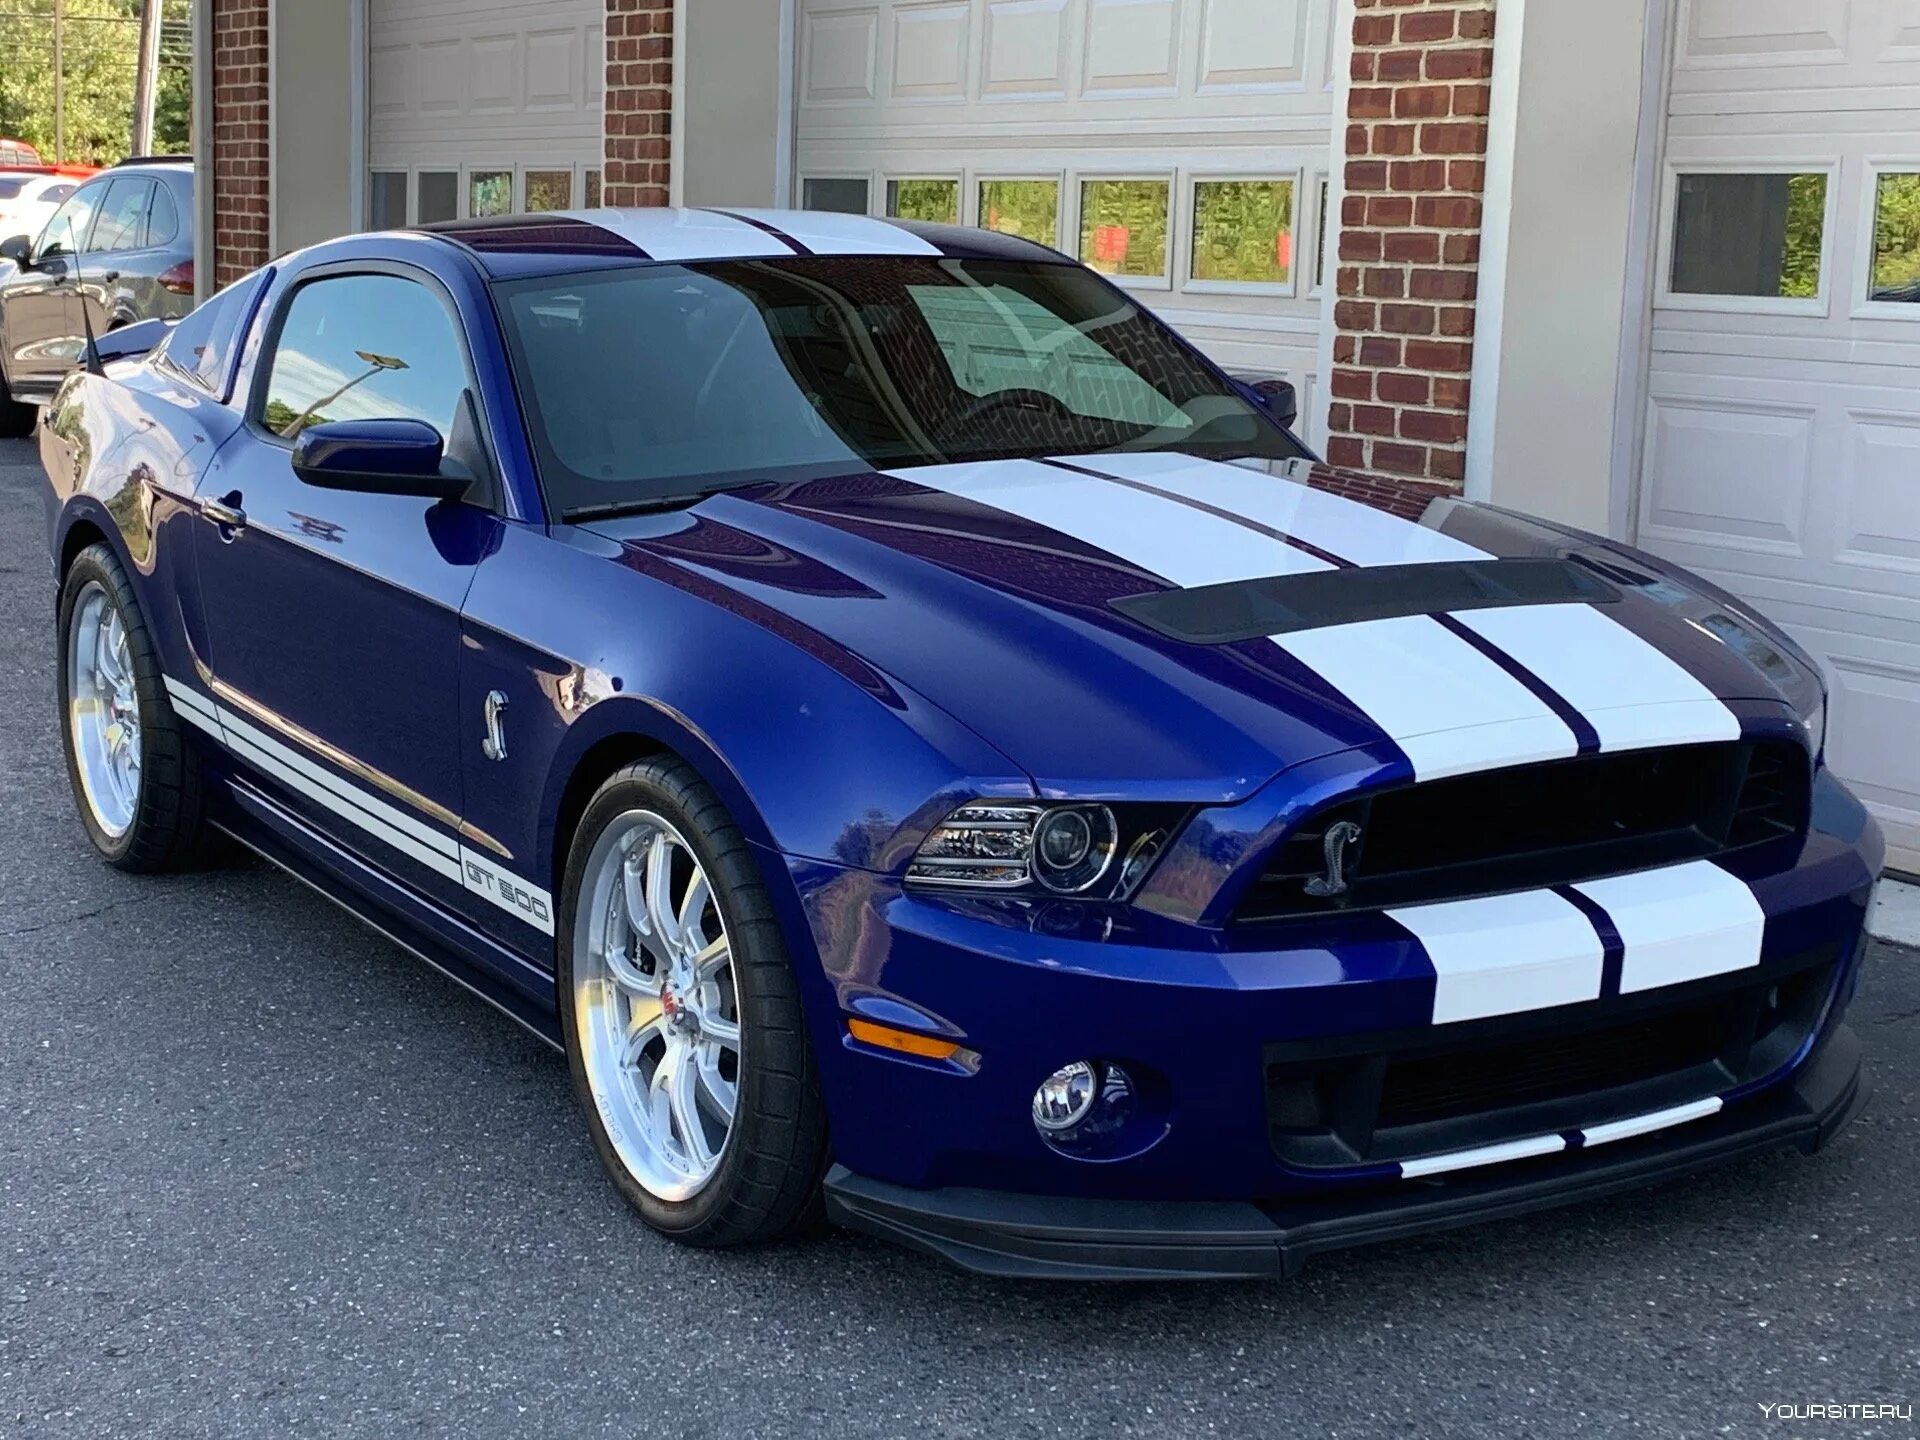 Mustang shelby gt. Форт Мустанг Шэлби gt 500. Форд Мустанг ГТ 500 Шелби. Форд gt 500 Shelby. Ford Shelby gt500.